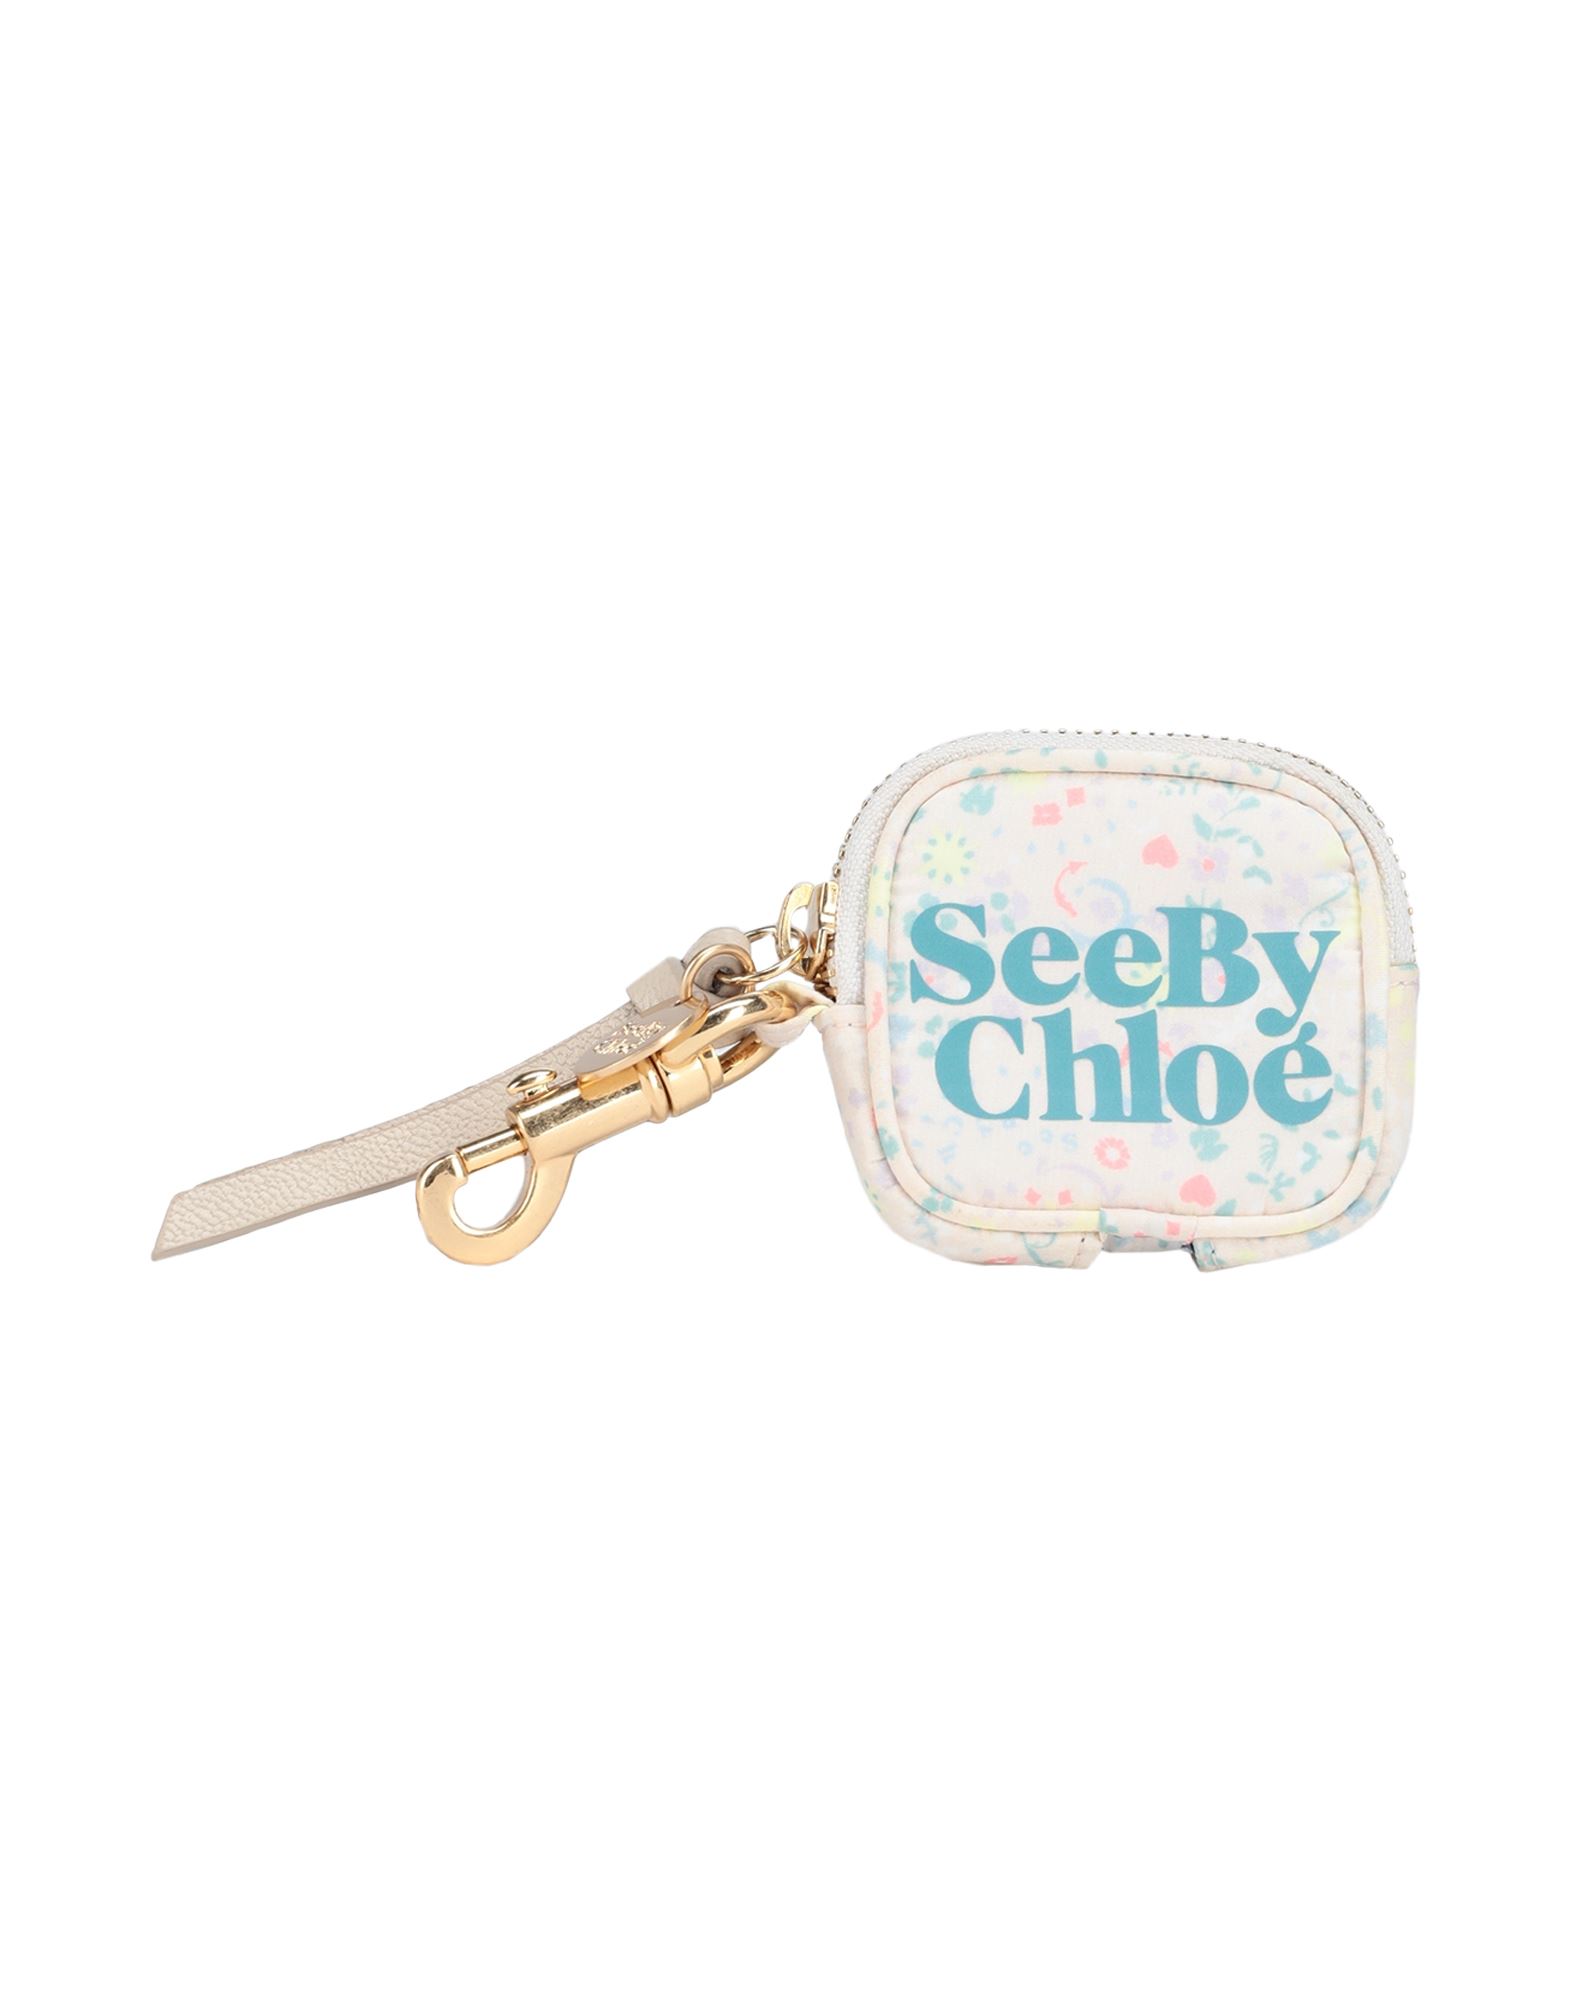 See By Chloé Key Rings In White